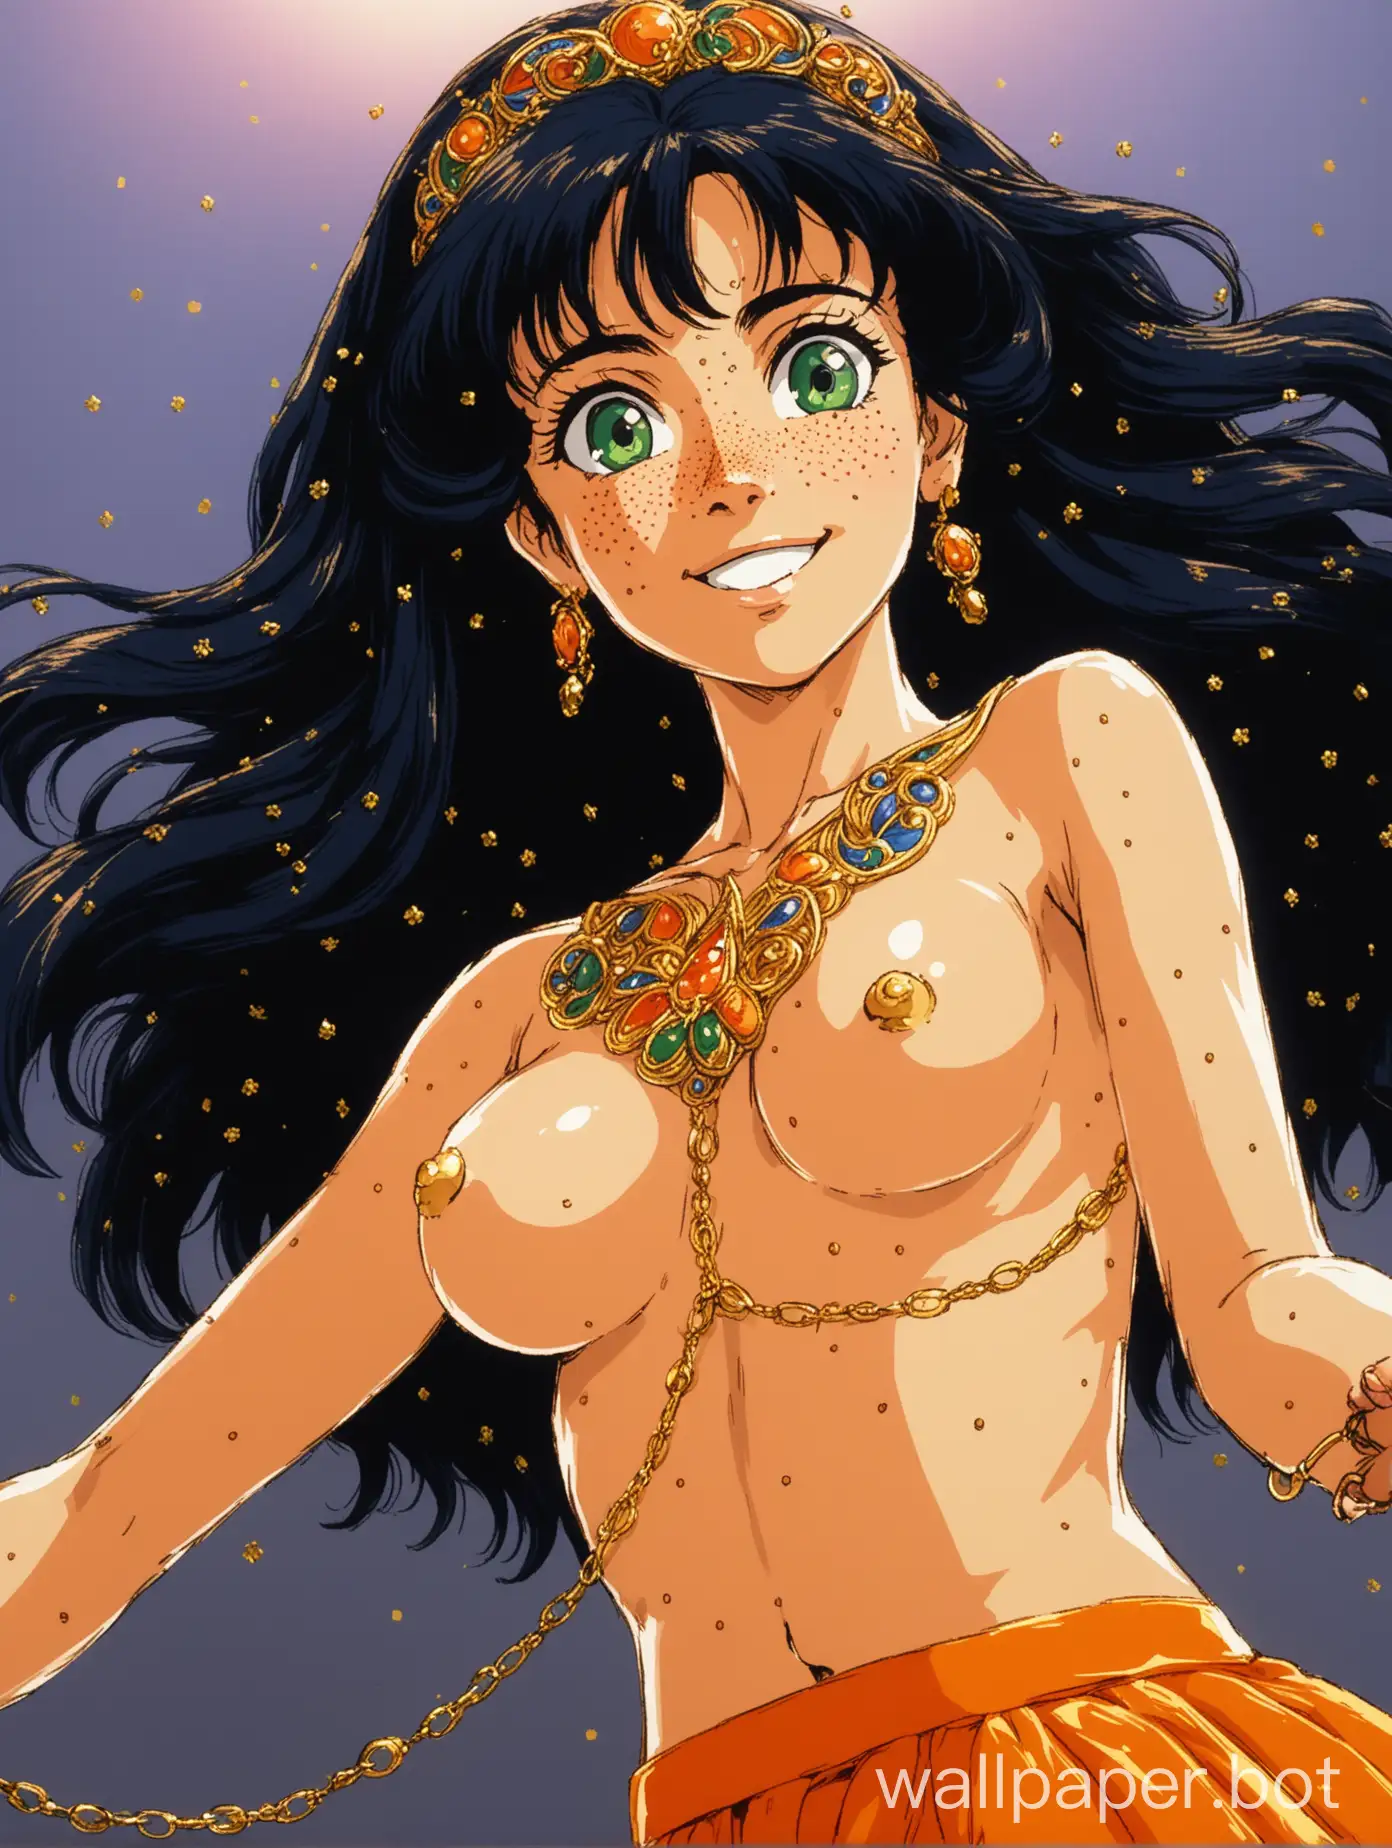 view from below, portrait of a young Syrian woman dancing topless, she is pretty, smiling, she has green eyes, she has olive skin, she has lots of freckles, midriff, she has long flowing fluffy black hair, elegant, wearing a long orange and dark blue skirt, topless, cute breasts, wearing gold nipple clamps, freckled chest, gold embroidery, midriff, 1980s retro anime